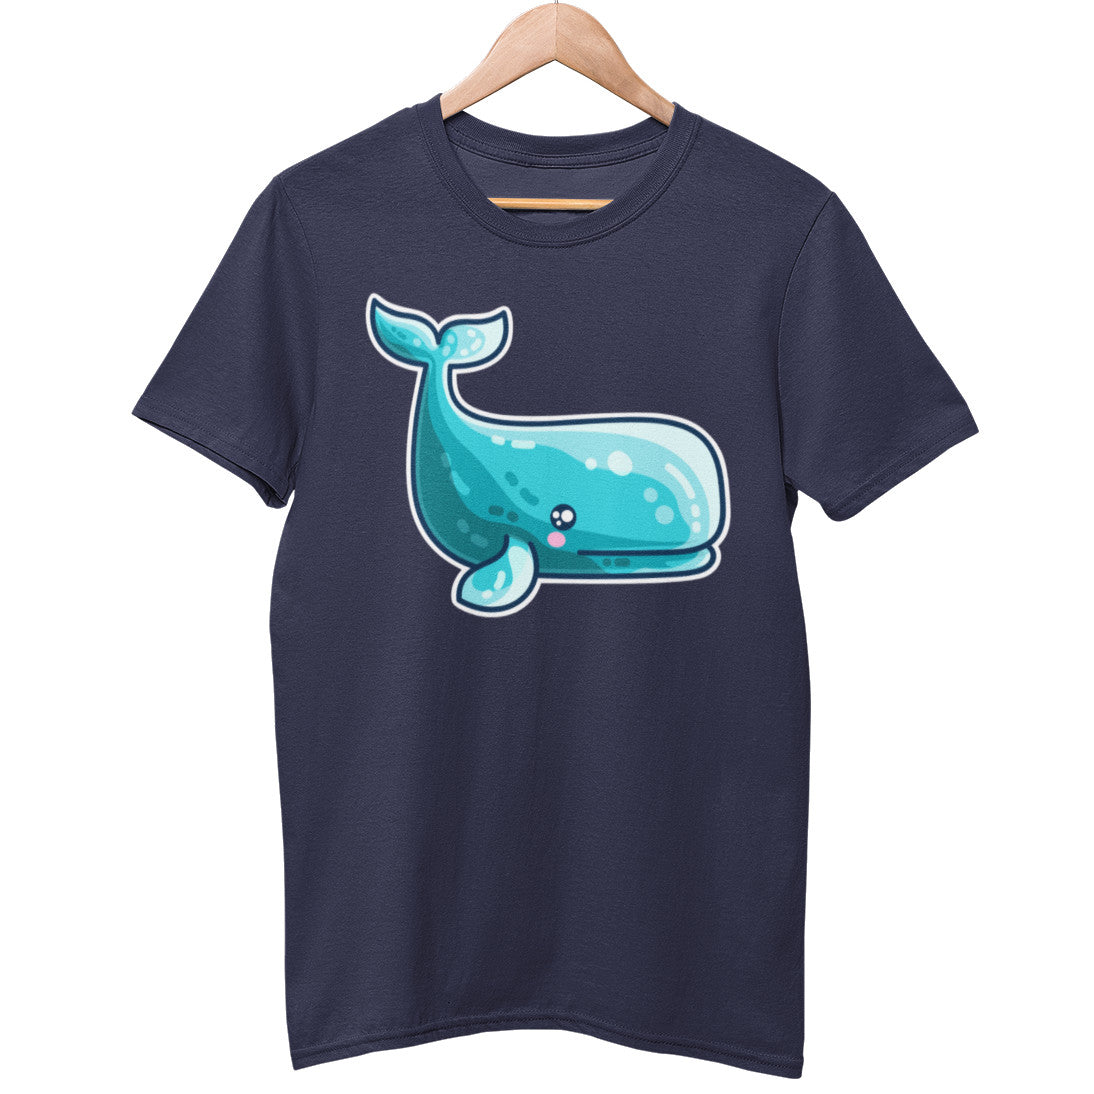 A navy blue unisex crewneck t-shirt on a wooden hanger with a design on its chest of a turquoise kawaii cute whale facing to the right